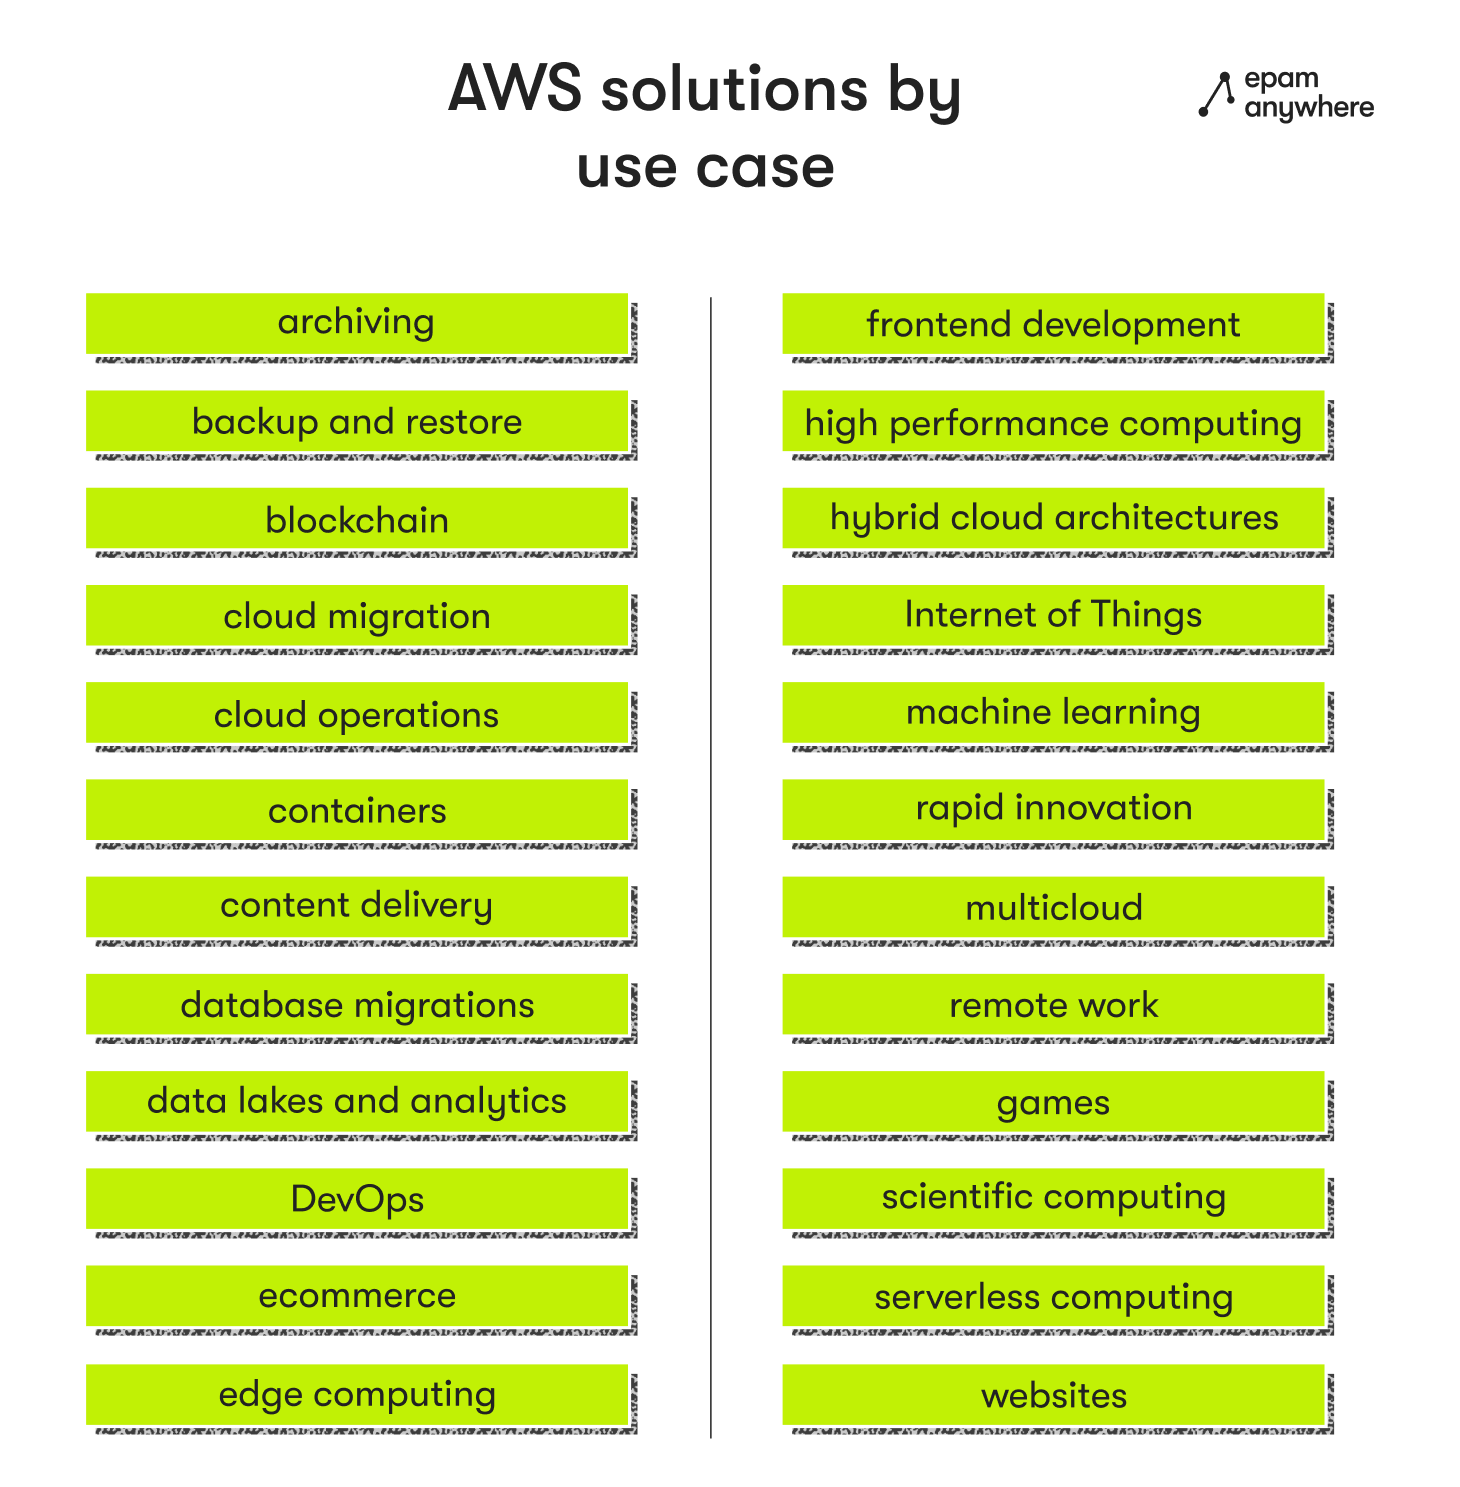 What is AWS? AWS solutions by use case